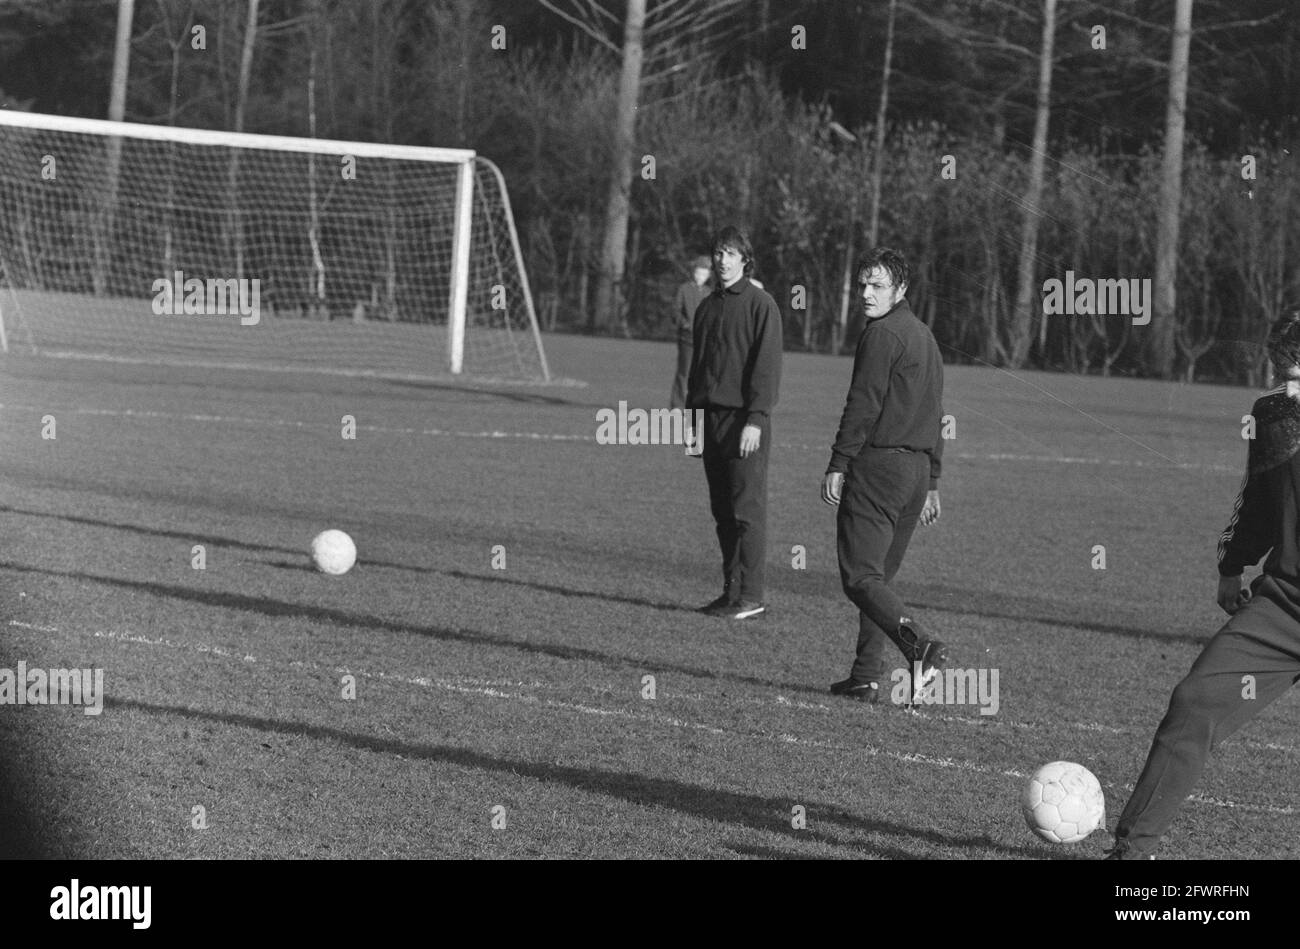 Dutch national team trains for match against Luxembourg, at Zeist, February 22, 1971, sport, soccer, The Netherlands, 20th century press agency photo, news to remember, documentary, historic photography 1945-1990, visual stories, human history of the Twentieth Century, capturing moments in time Stock Photo